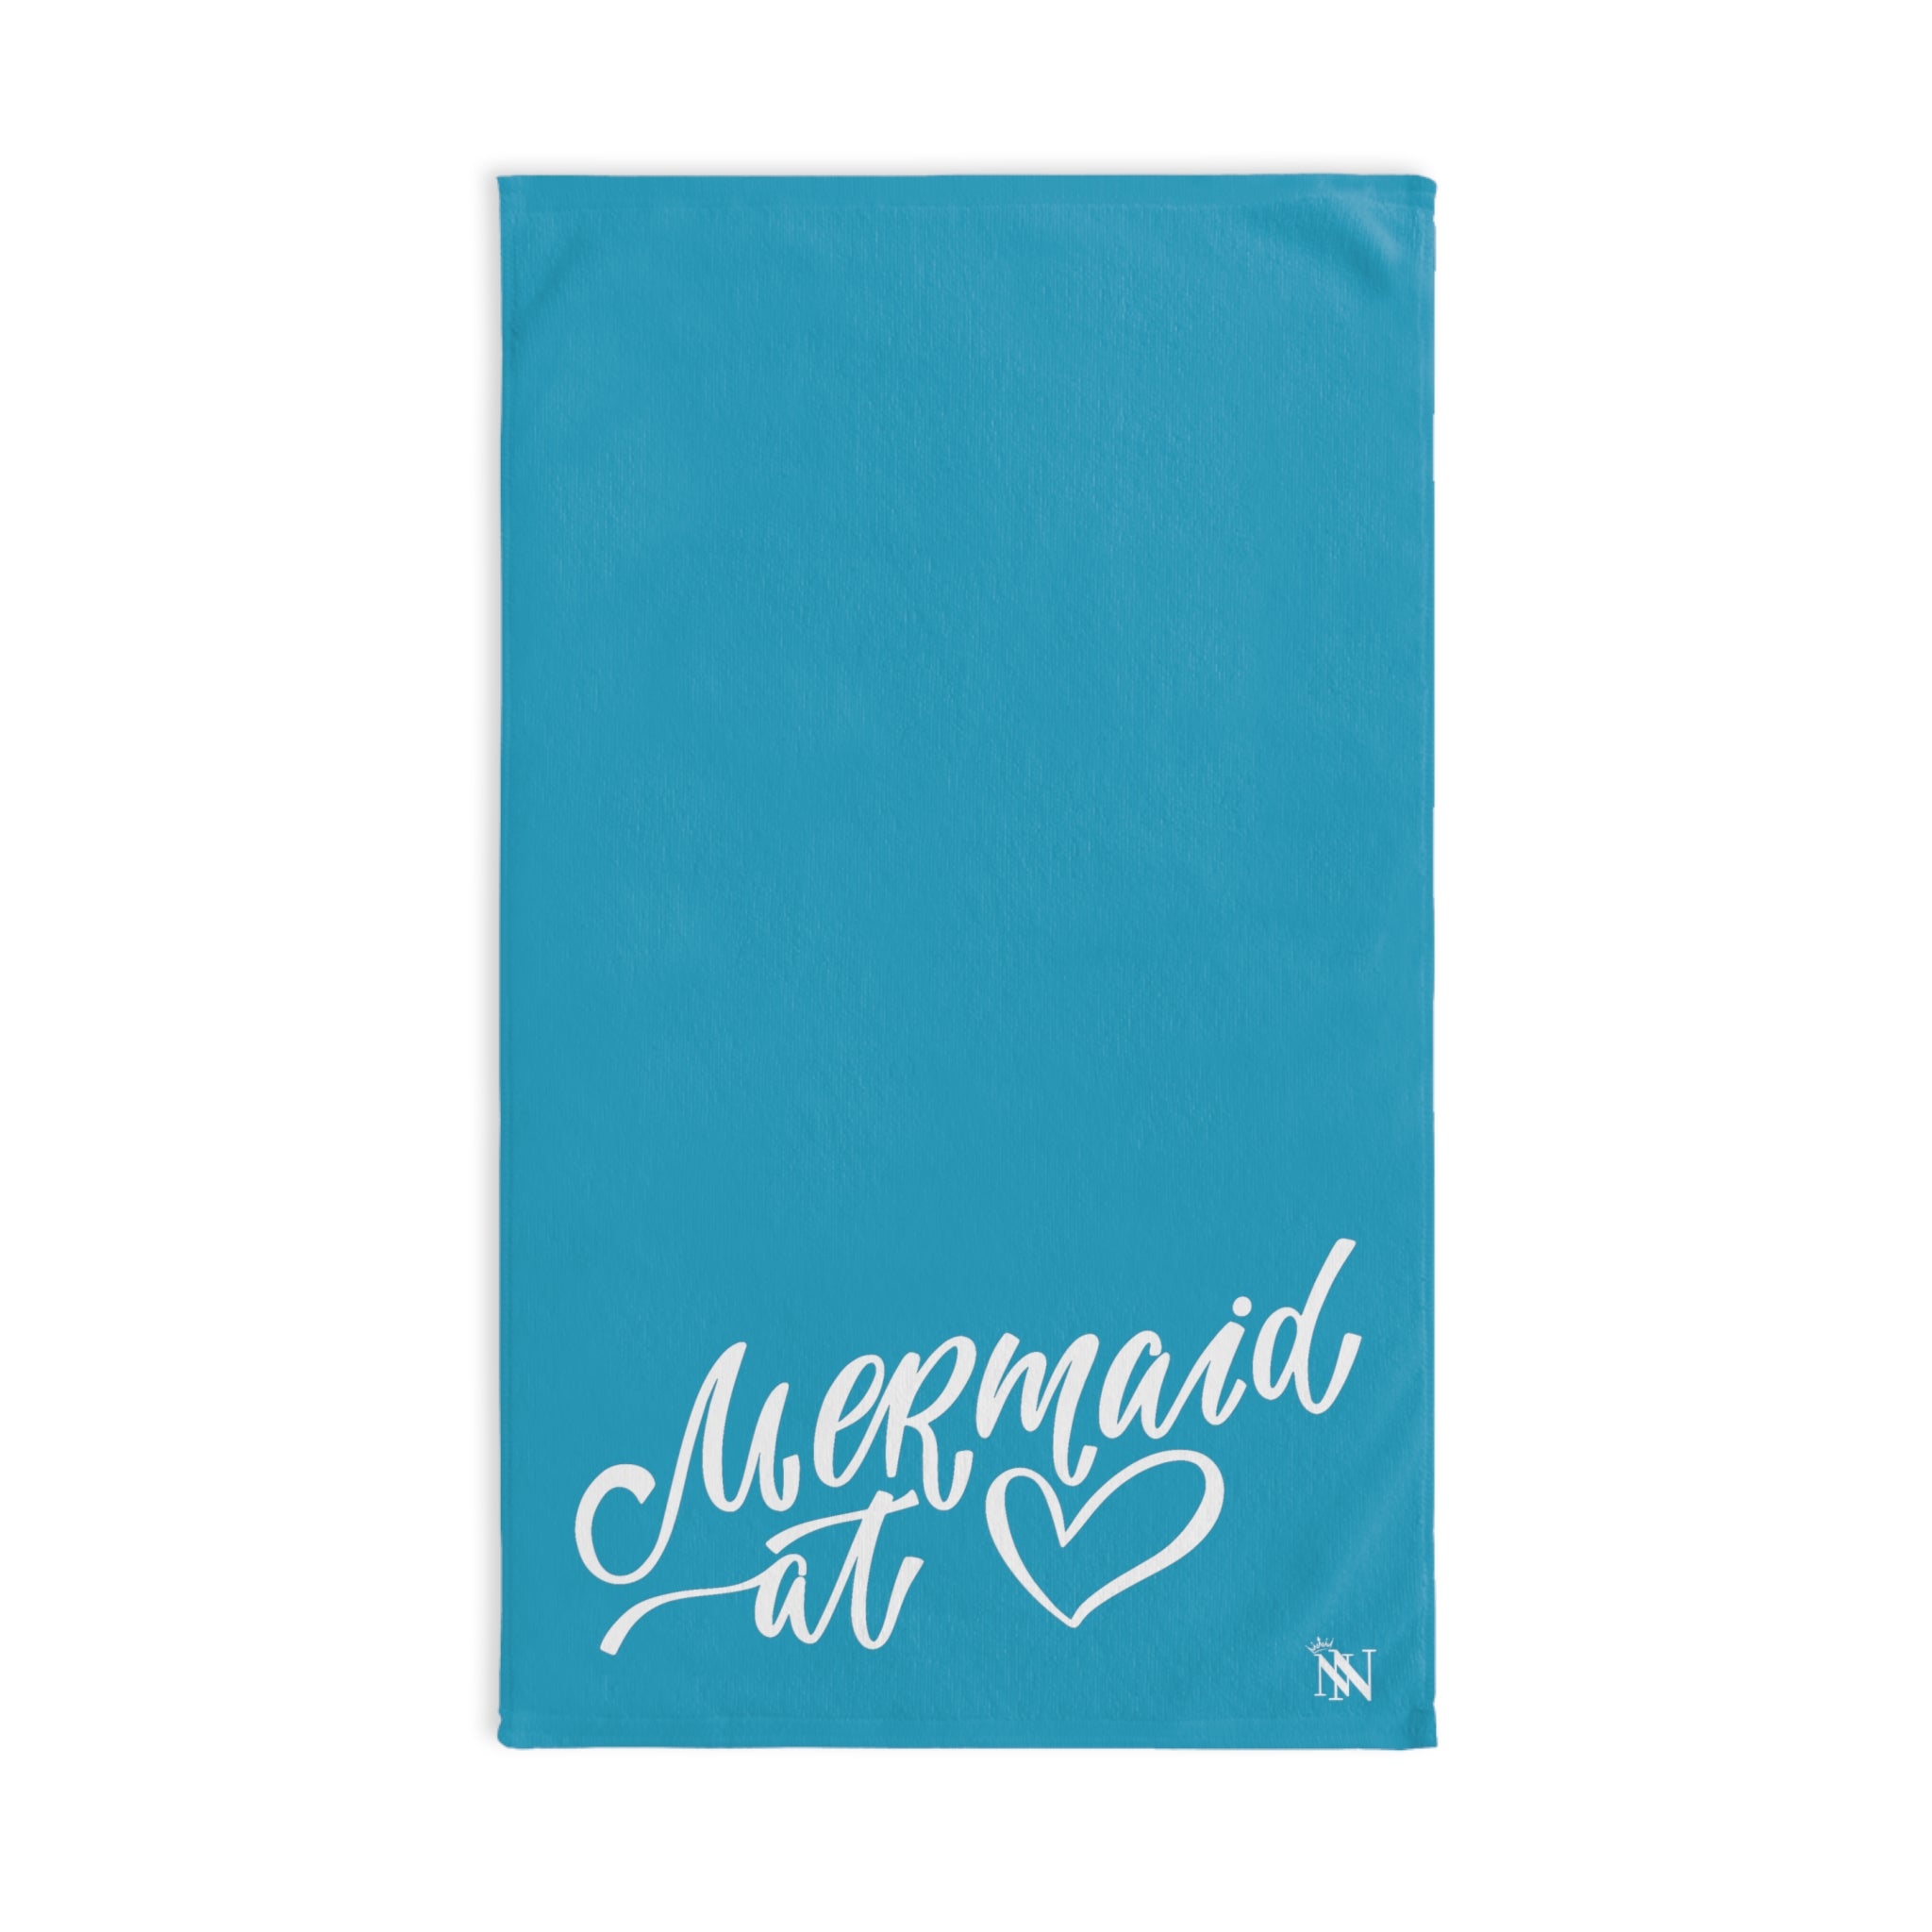 Mermaid At Heart Teal | Novelty Gifts for Boyfriend, Funny Towel Romantic Gift for Wedding Couple Fiance First Year Anniversary Valentines, Party Gag Gifts, Joke Humor Cloth for Husband Men BF NECTAR NAPKINS